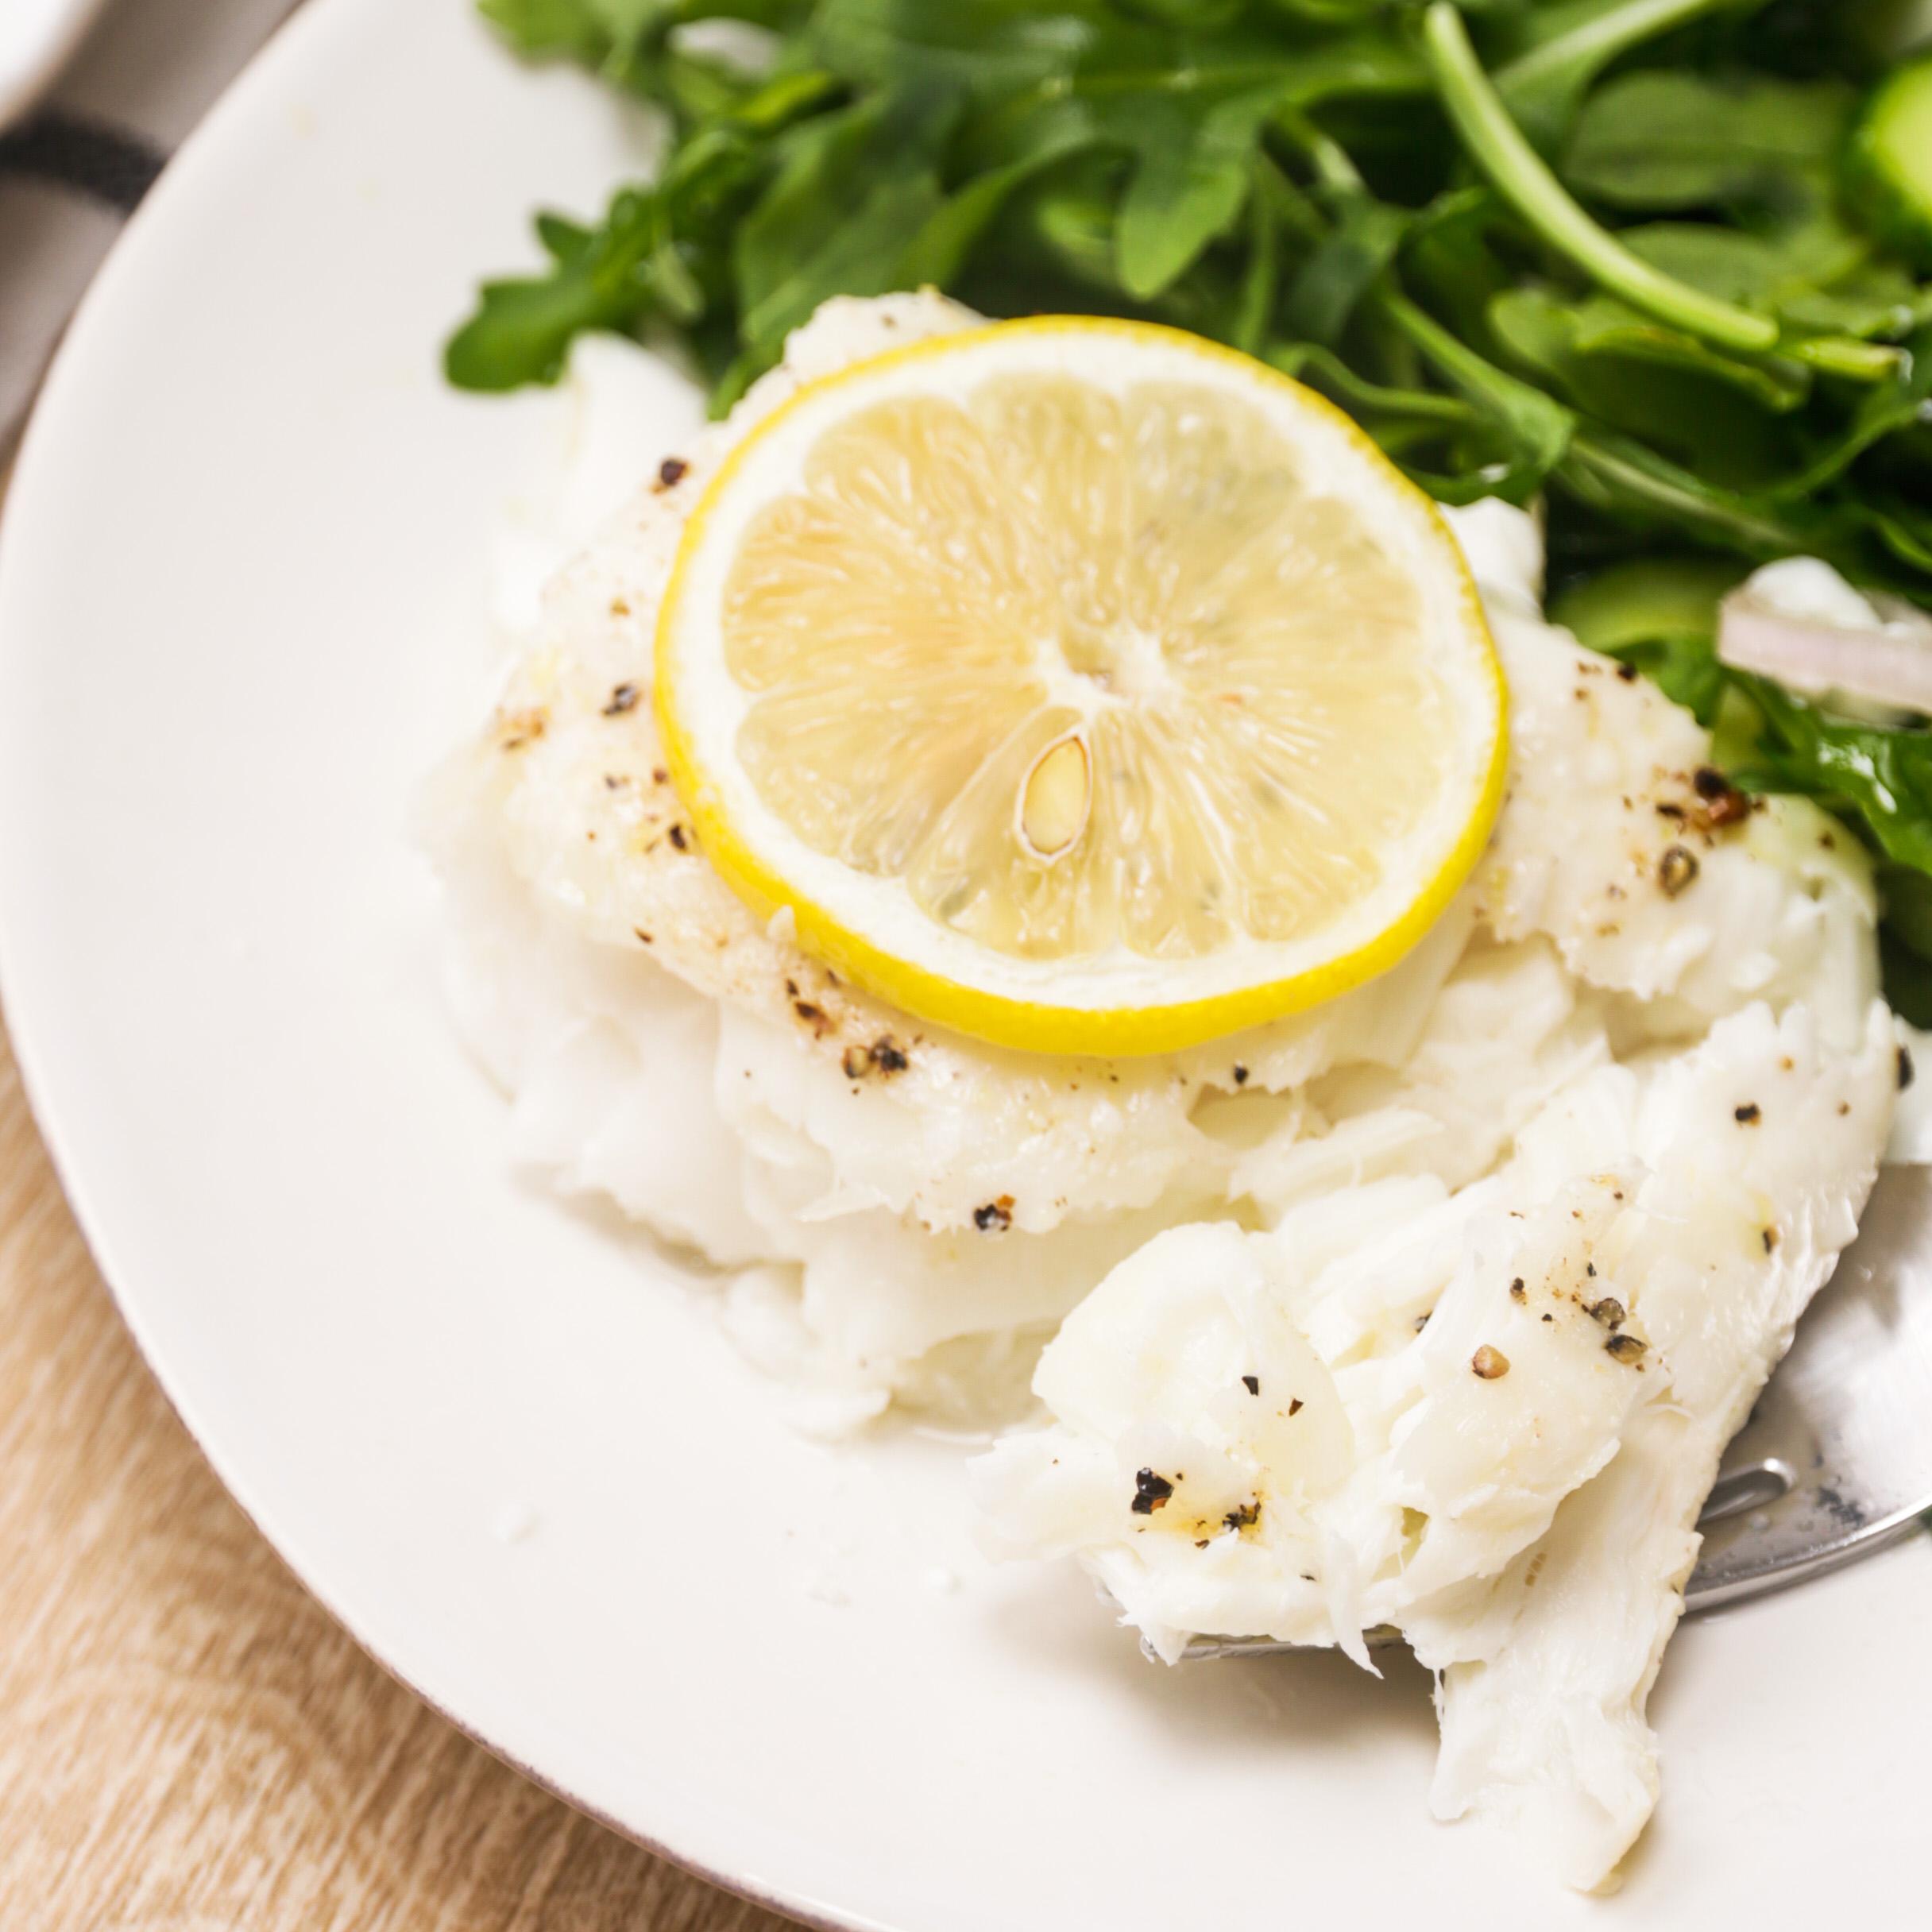 Baked Halibut Recipe by Tasty